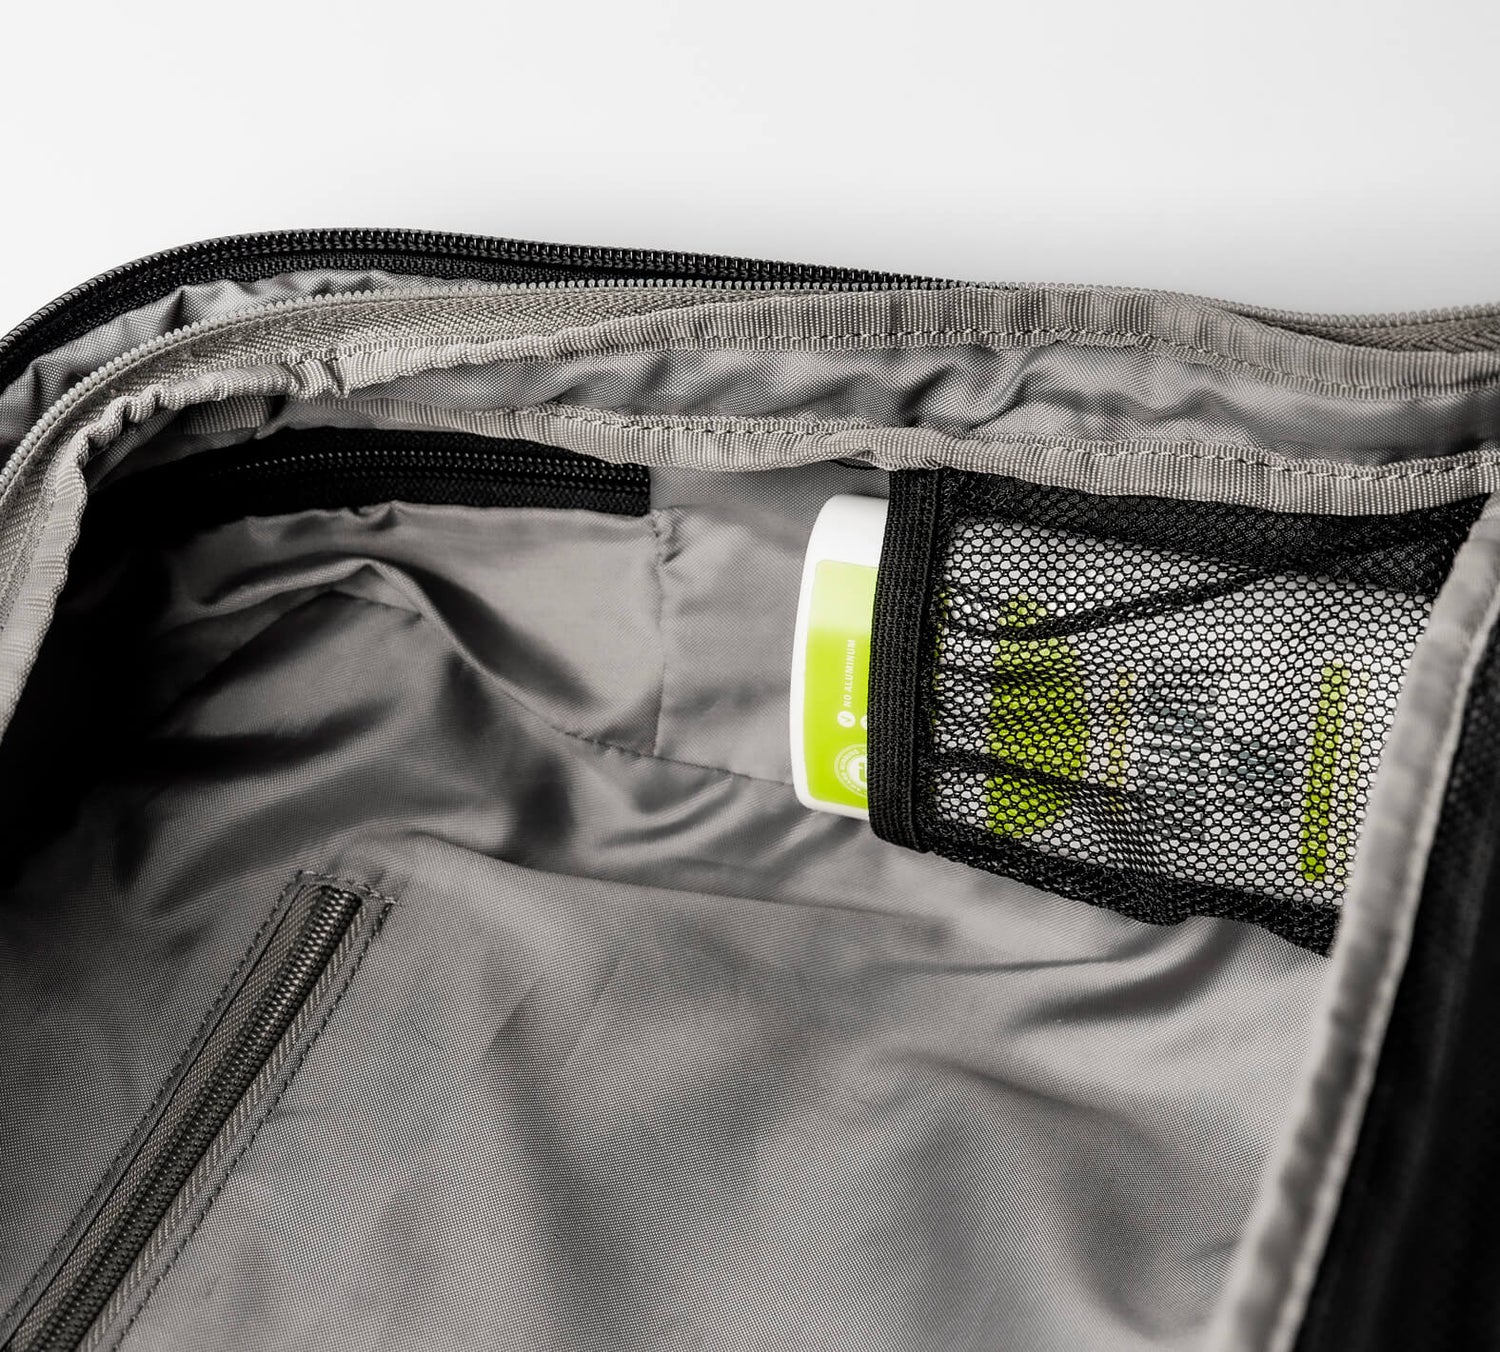 The Pakt One | Carry-On Travel Bag